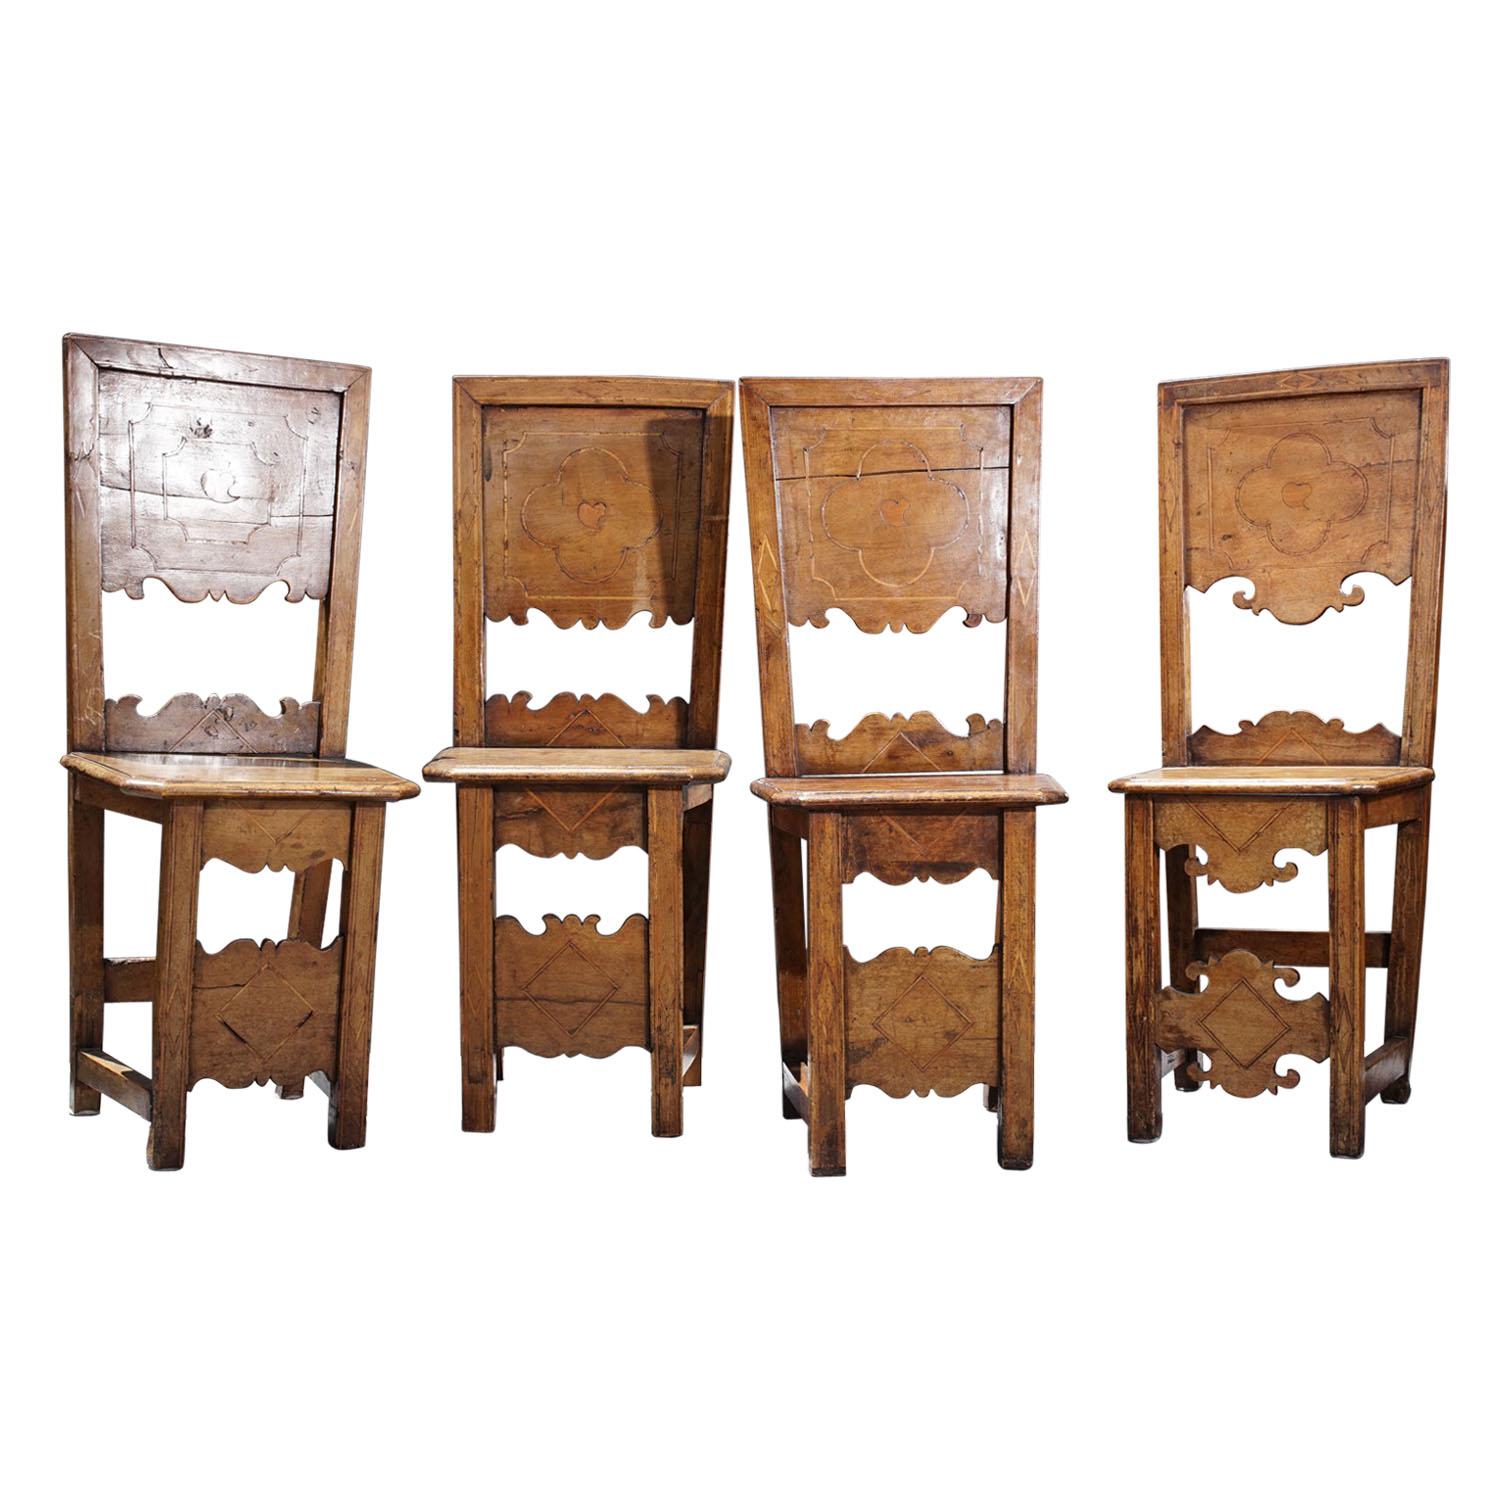 Group of Four 18th Century Inlaid Walnut Side Chairs For Sale